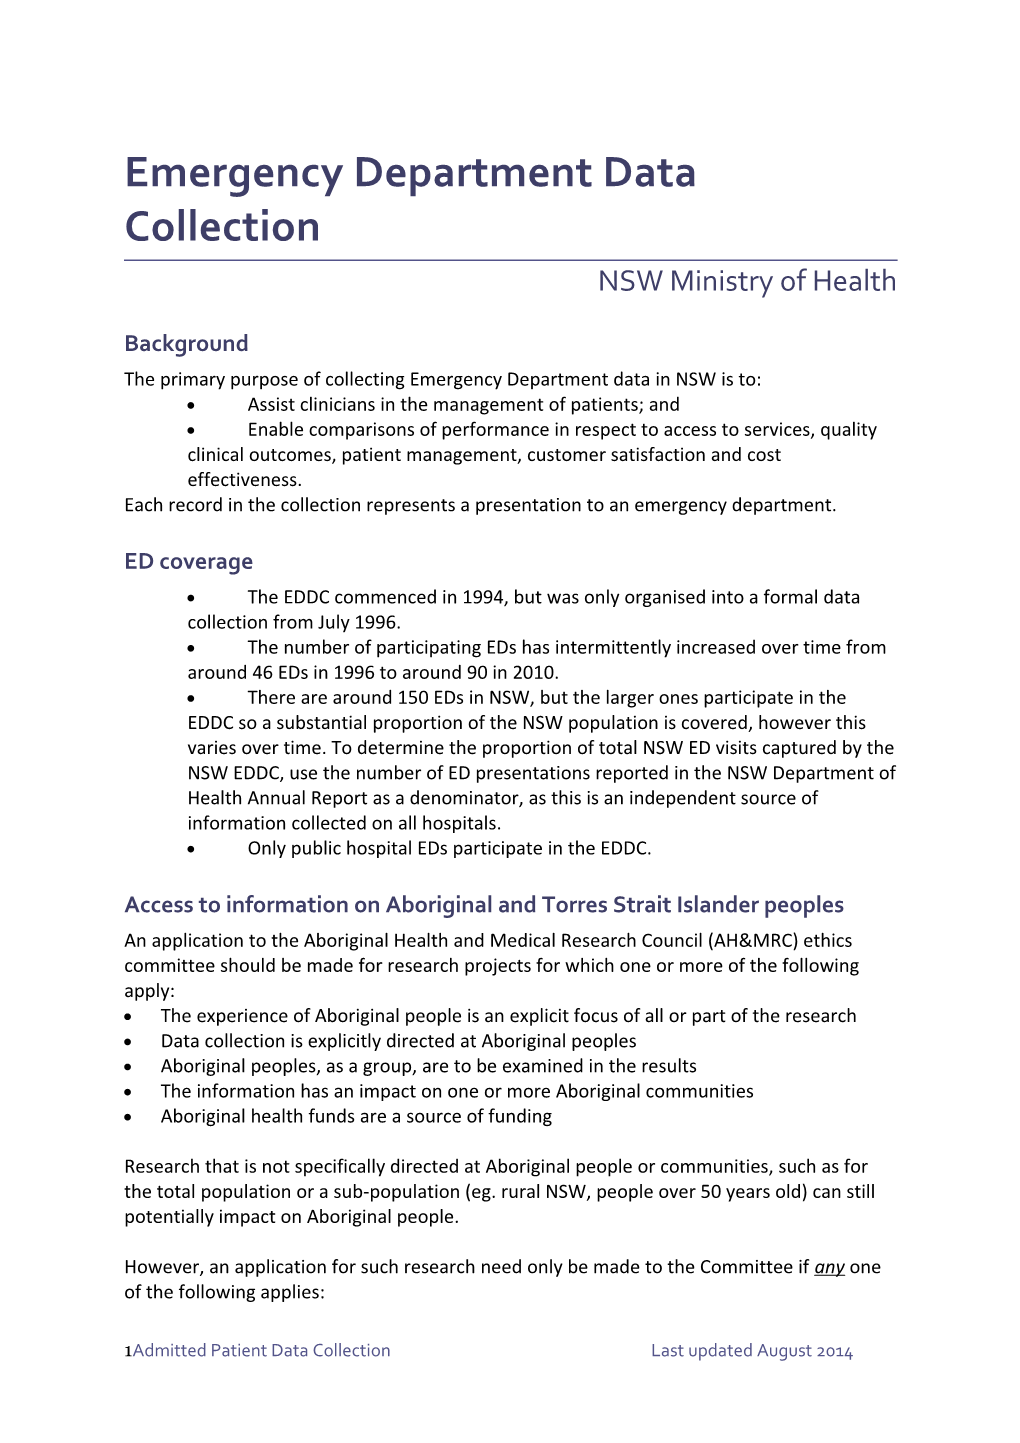 Emergency Department Data Collection